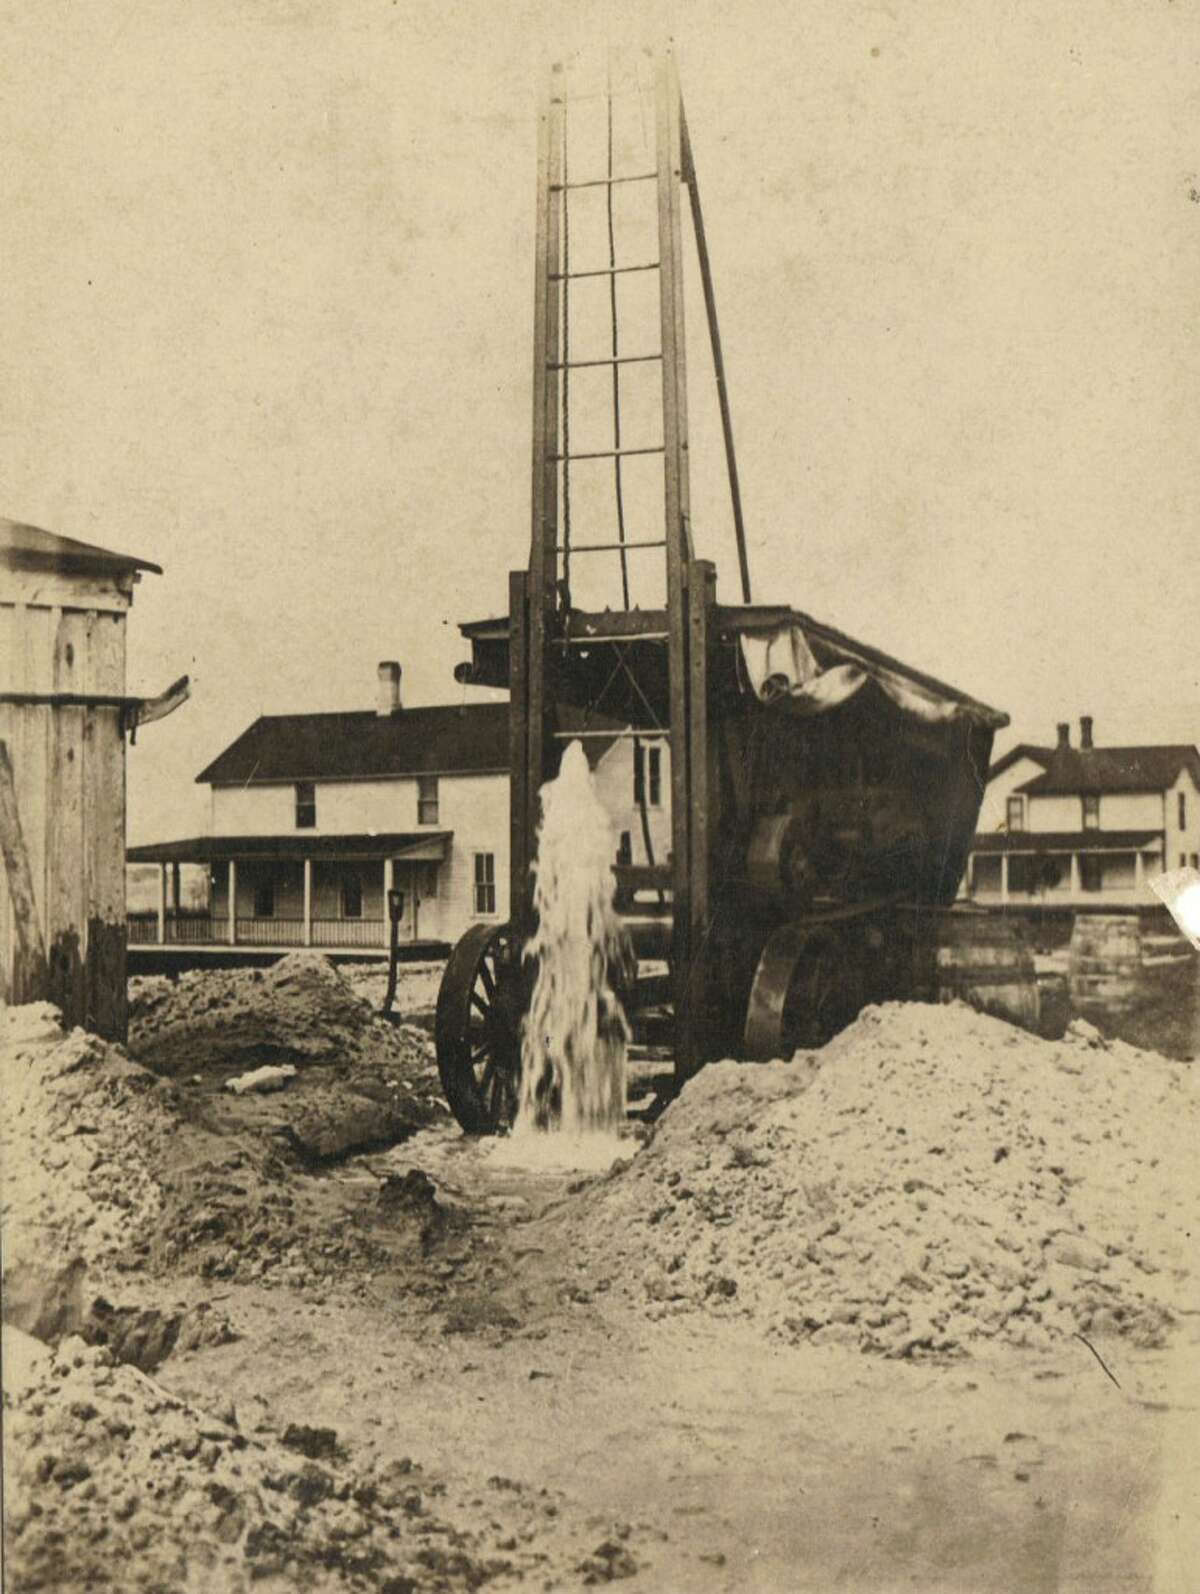 This early 1900s scene shows an artesian well that was drilled in Onekama. It was noted on the photo that the well was 126 feet deep and water flowed at a rate of 125 gallons per minute. (Courtesy Photo/Manistee County Historical Museum)